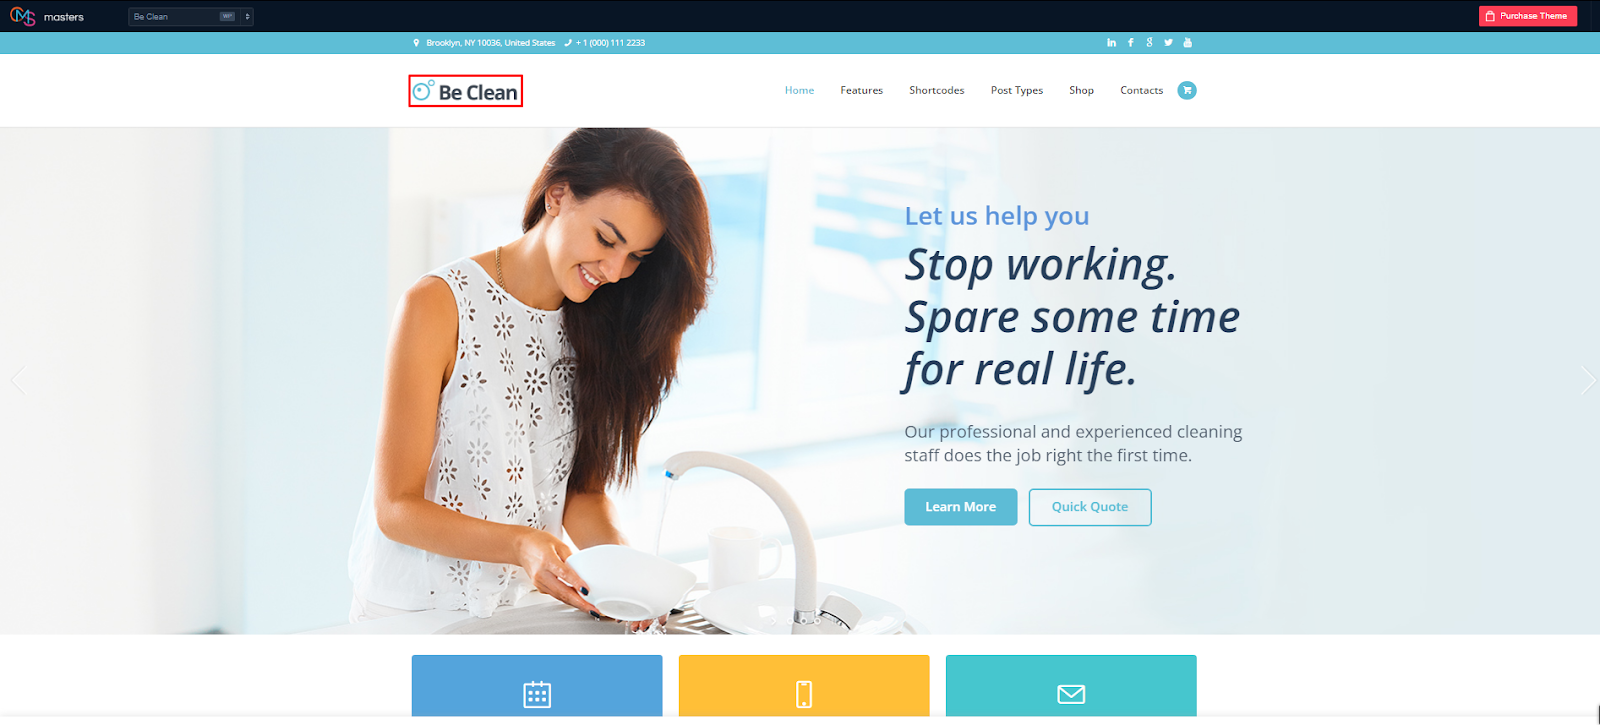 Be Clean - Cleaning Company, Laundry, and Maid Service WordPress theme